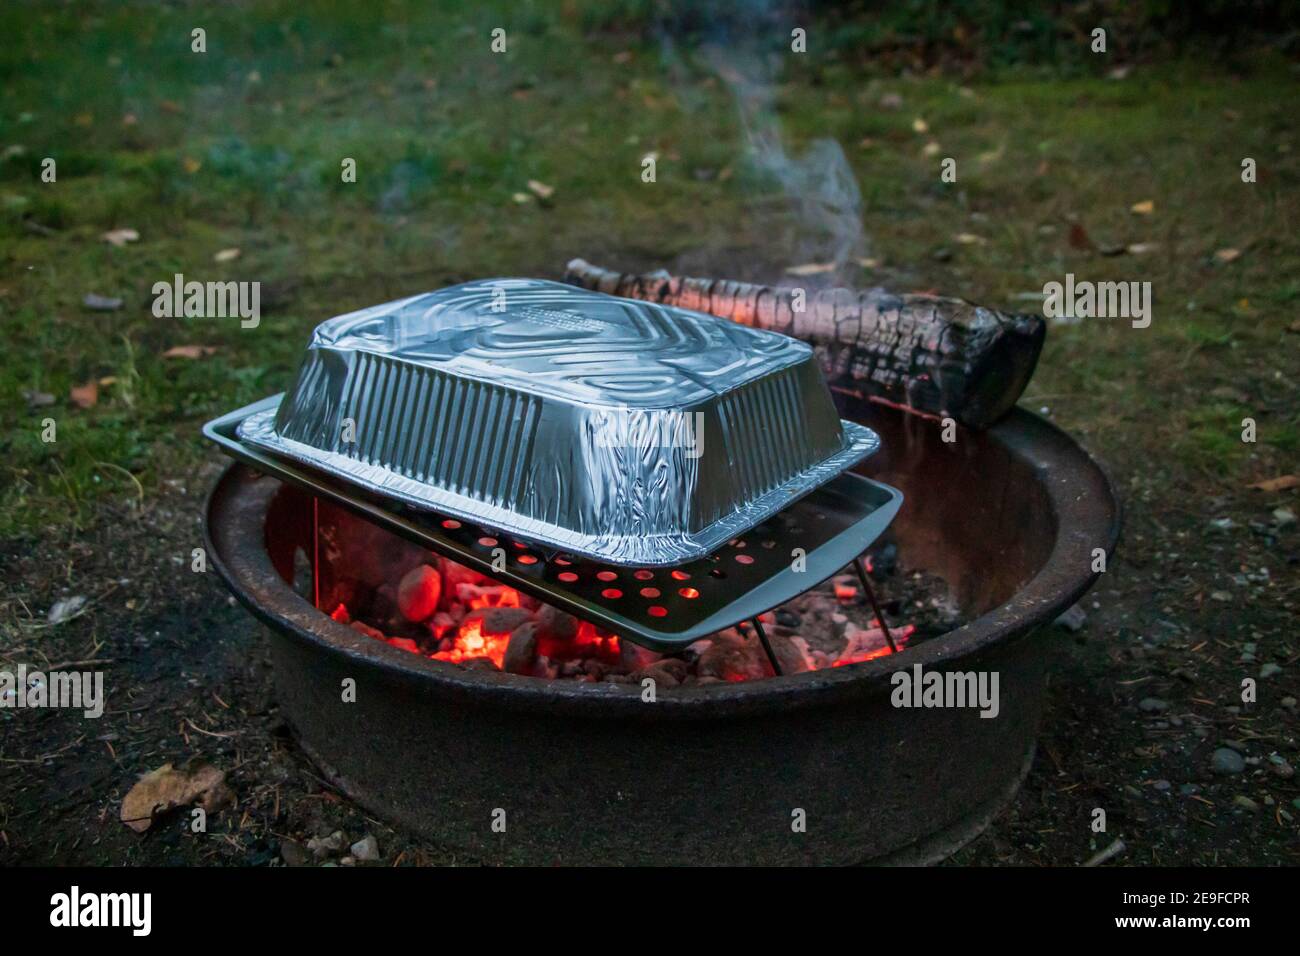 Homemade campfire oven to heat meal with aluminium and perforated pans over bonfire embers Stock Photo